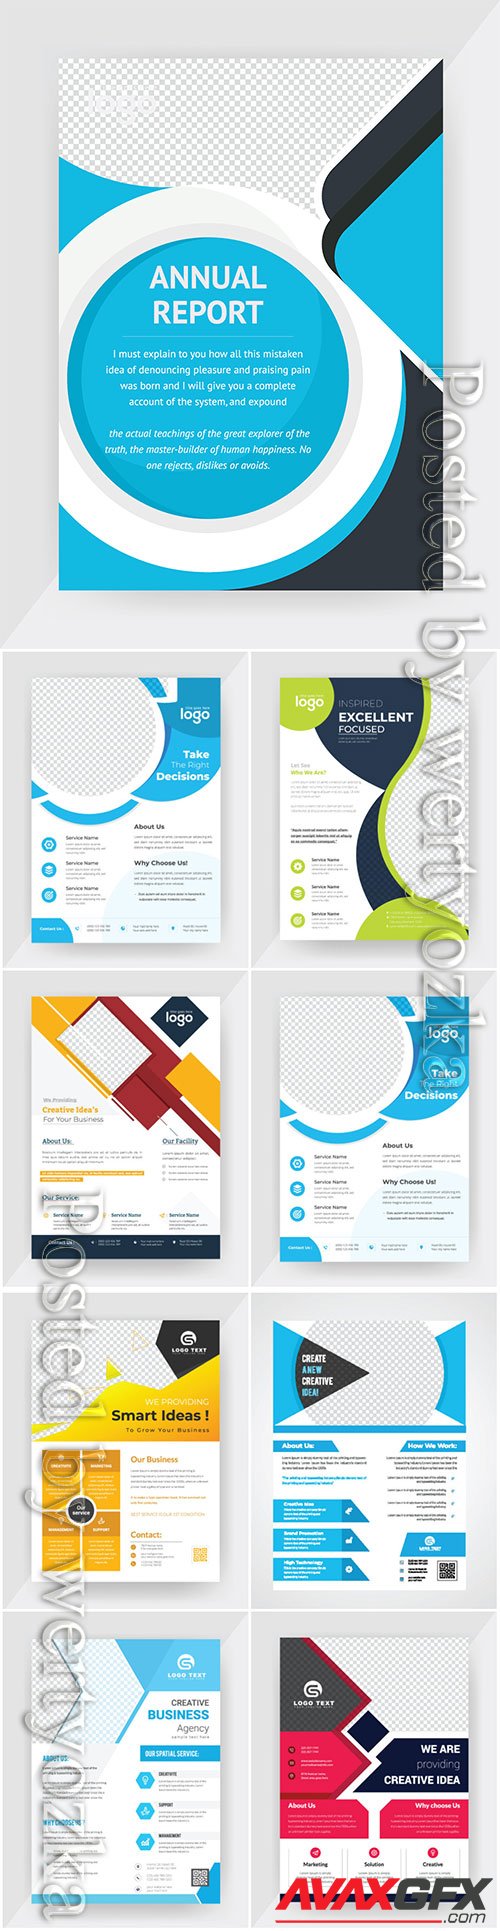 Annual report concept flyer vector template